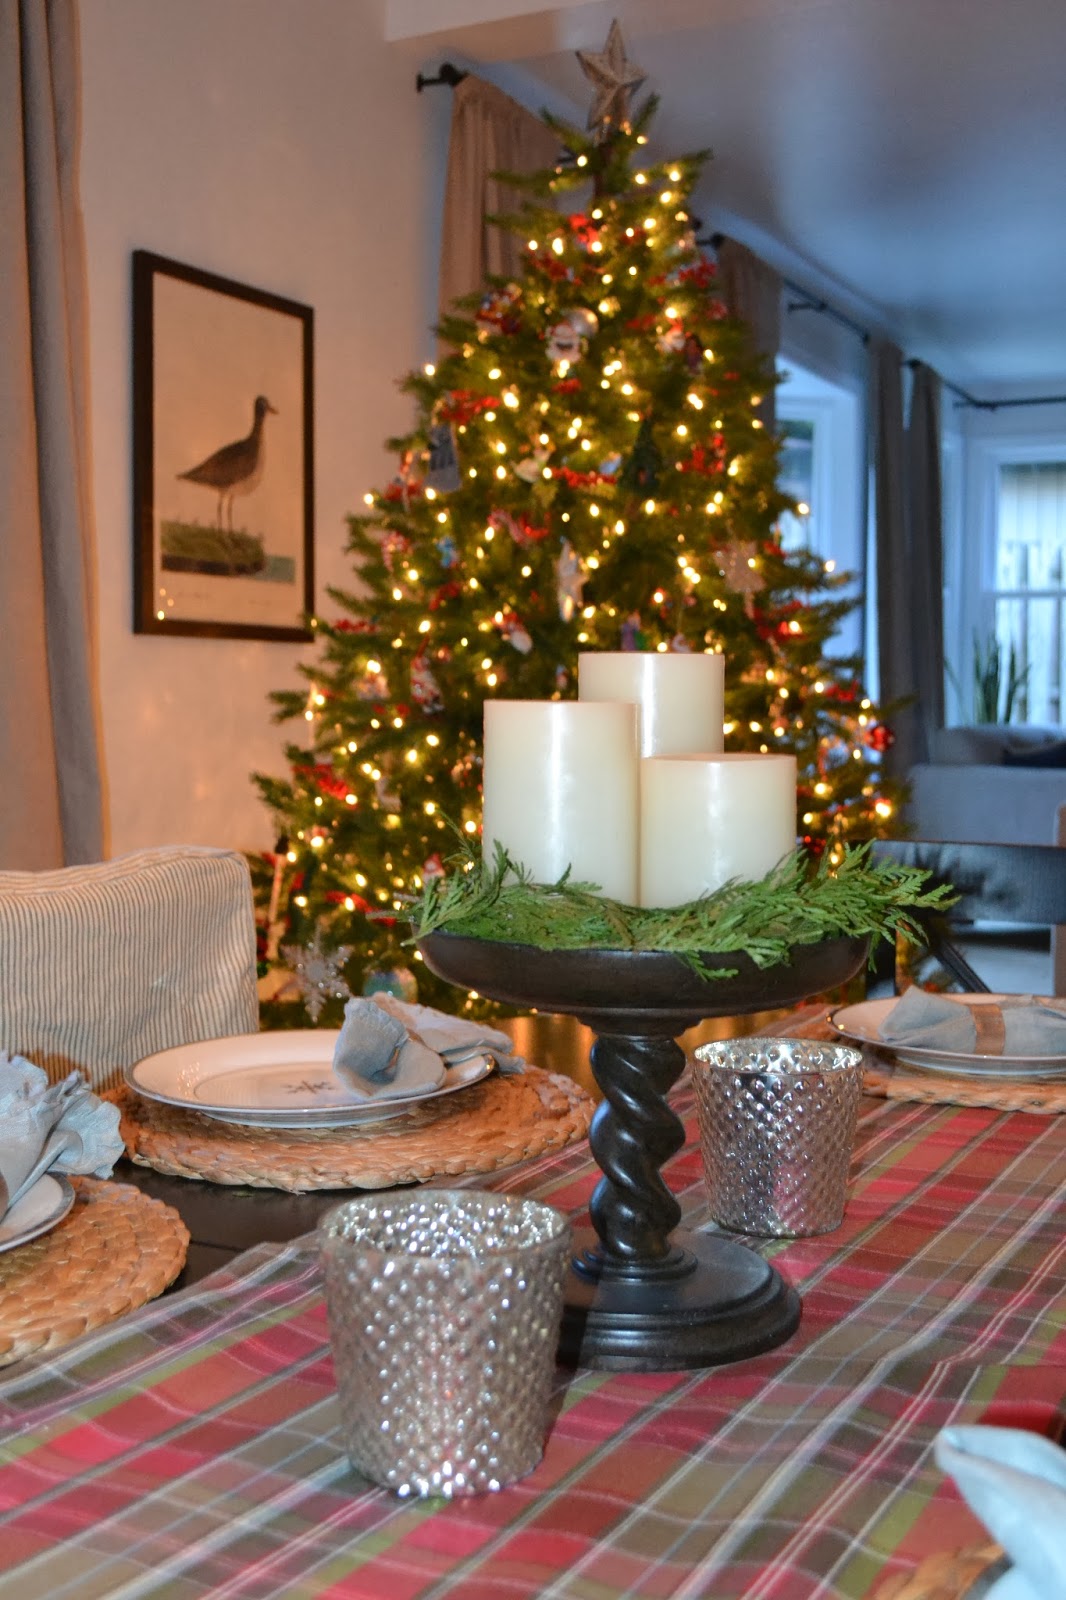 Steward of Design: My Holiday Home Tour 2013